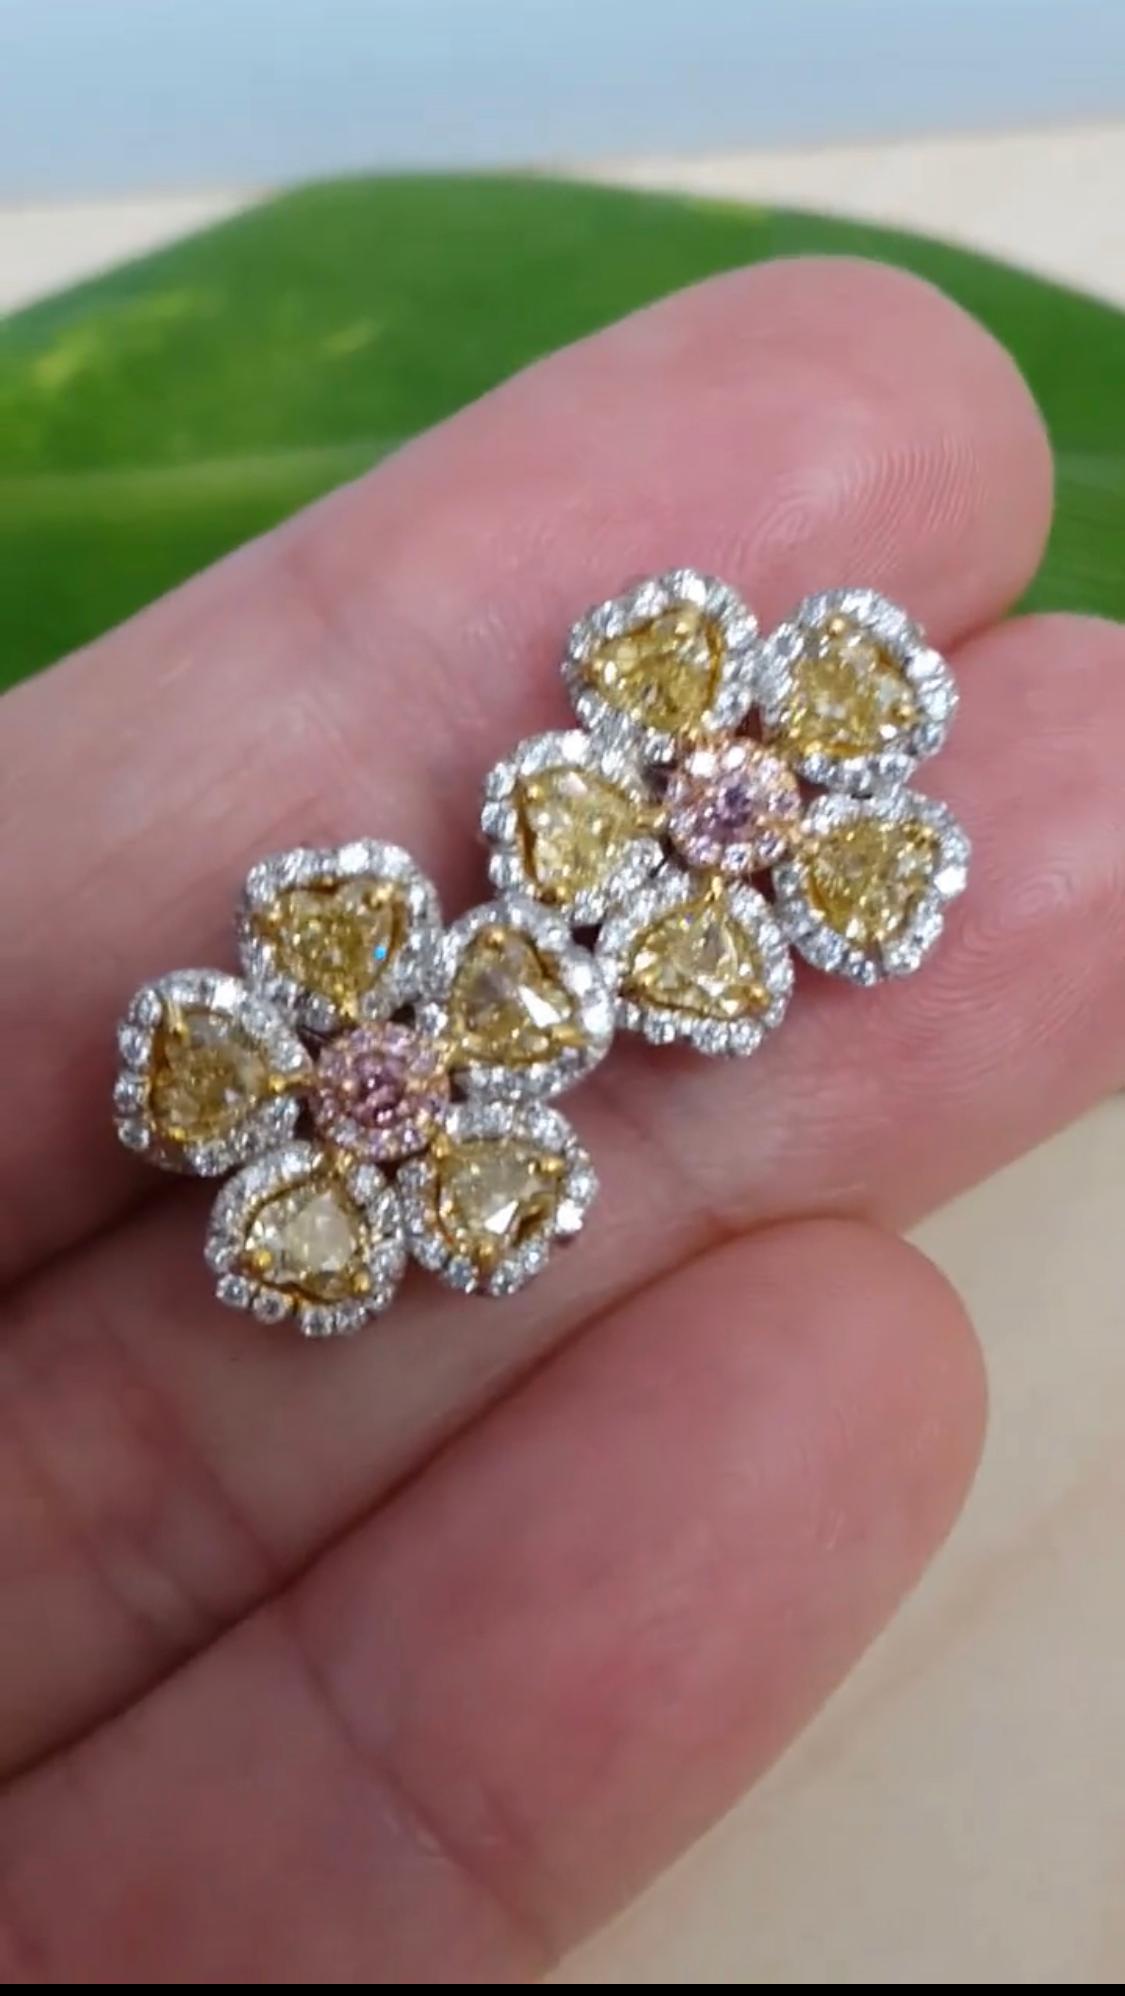 Elegant floral motifs shine in these beautiful Yellow and Pink Diamond Stud Earrings diamond. These earrings are crafted in 18k white and yellow gold feature 10 heart shape yellow diamonds weighing approximately 2.02 carat, and 20 round brilliant